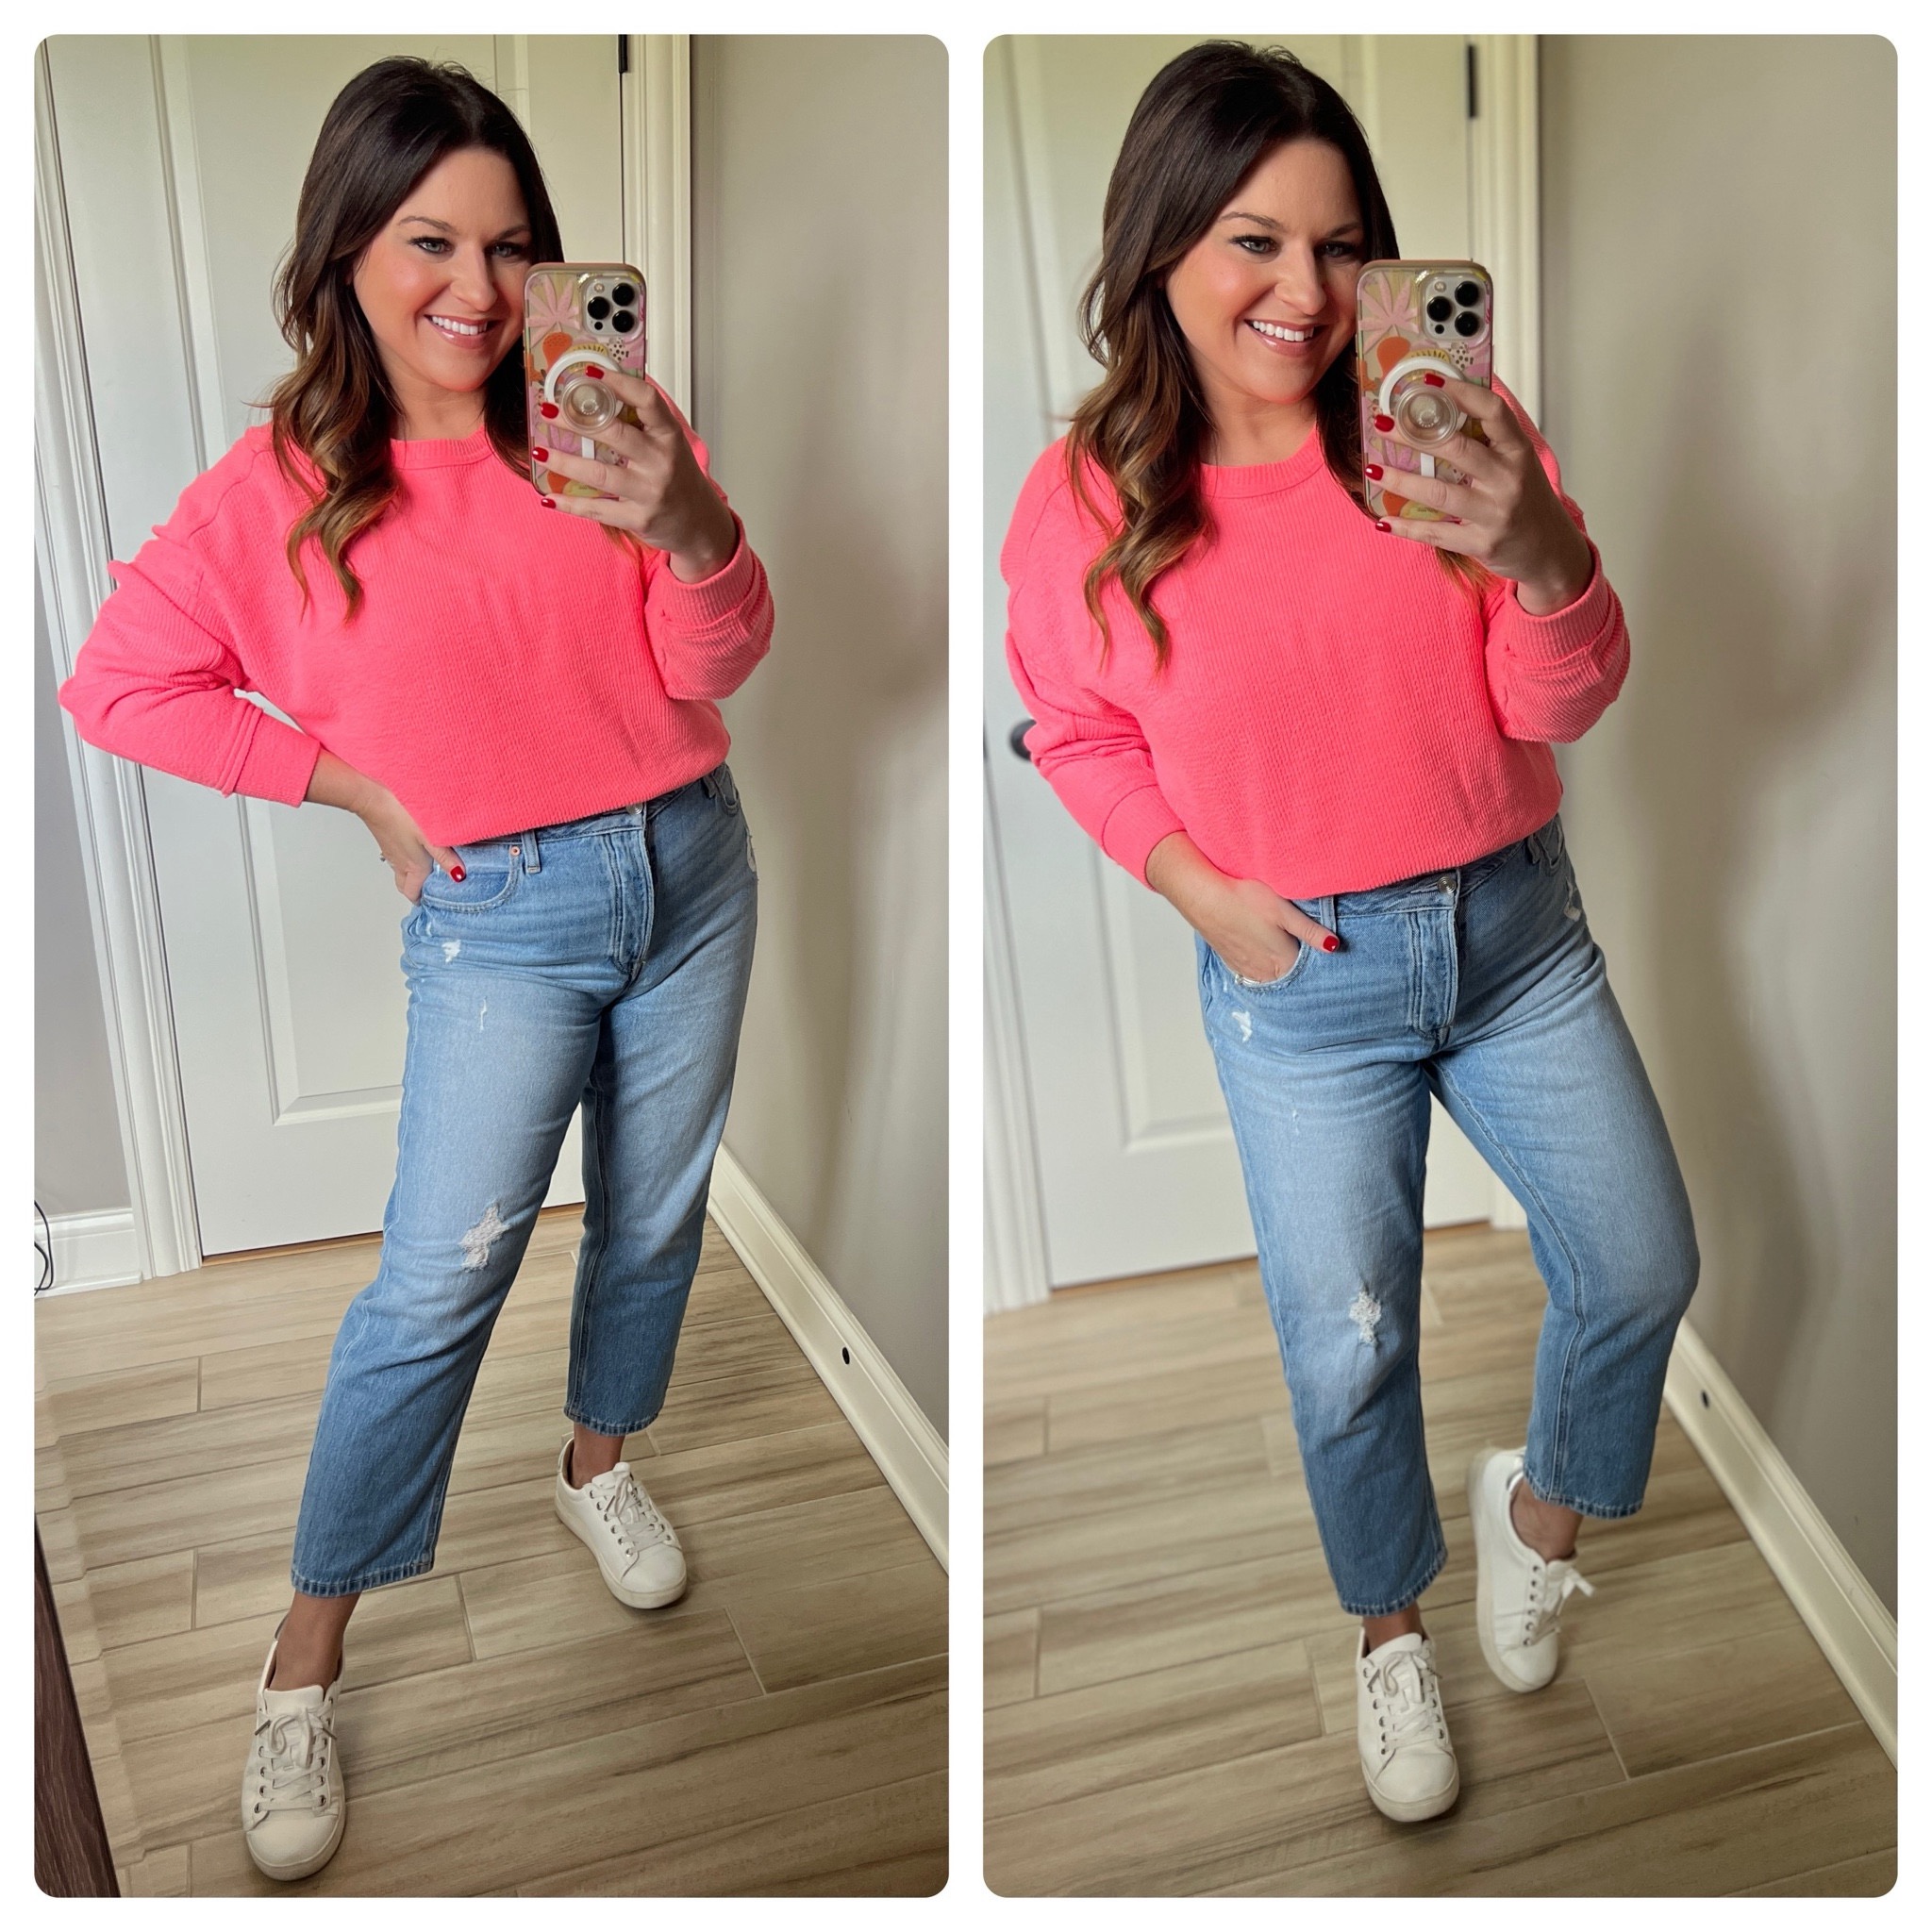 Chic & Comfortable: Spring Fashion for Teachers

spring, spring fashion, spring outfit, denim jeans, pink sweater, white sneakers